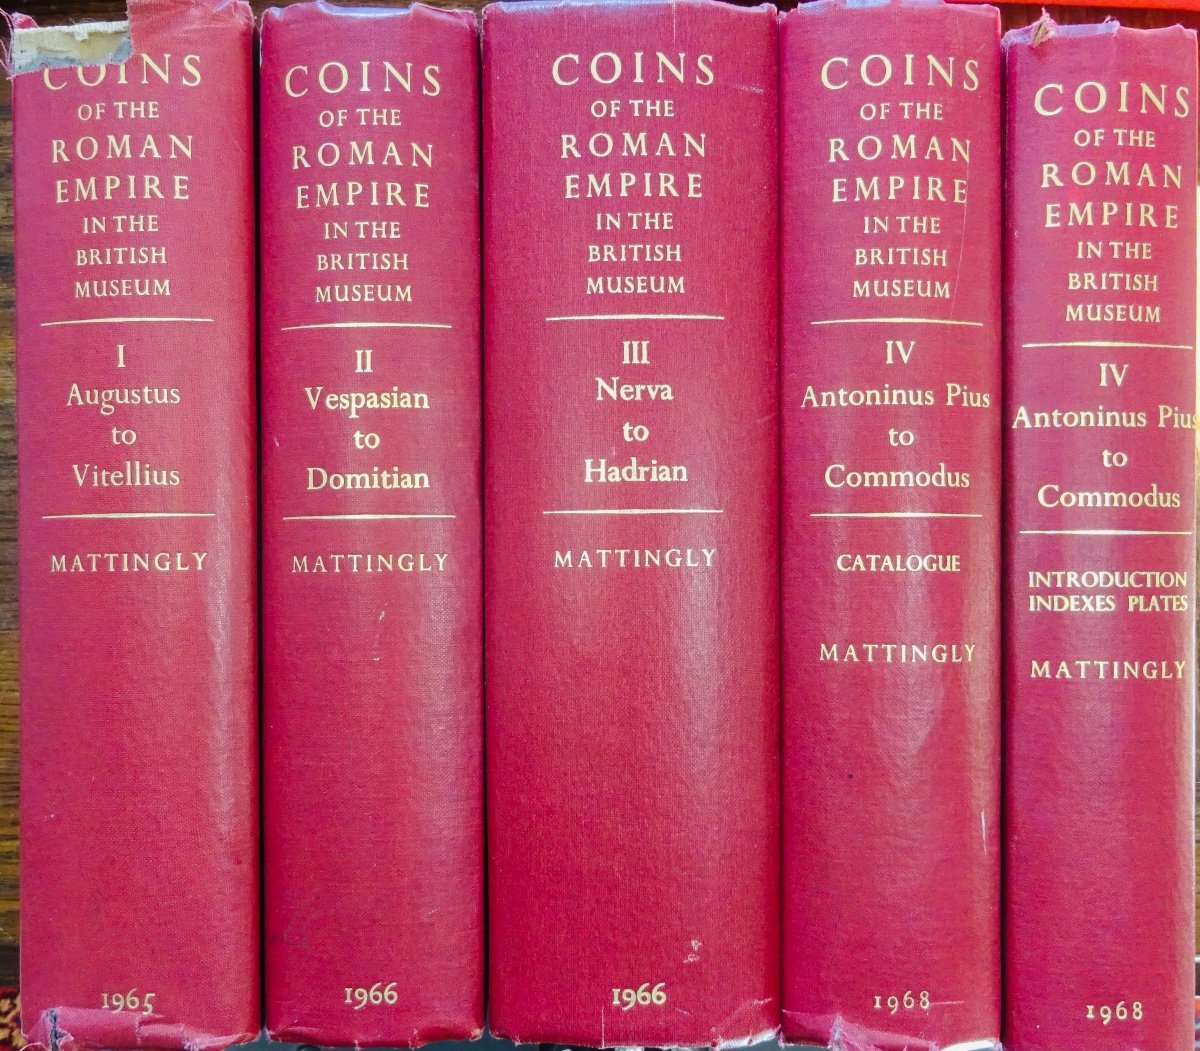 MATTINGLY (Harold) - Coins of the Roman Empire in the British Museum. 1965-1968.